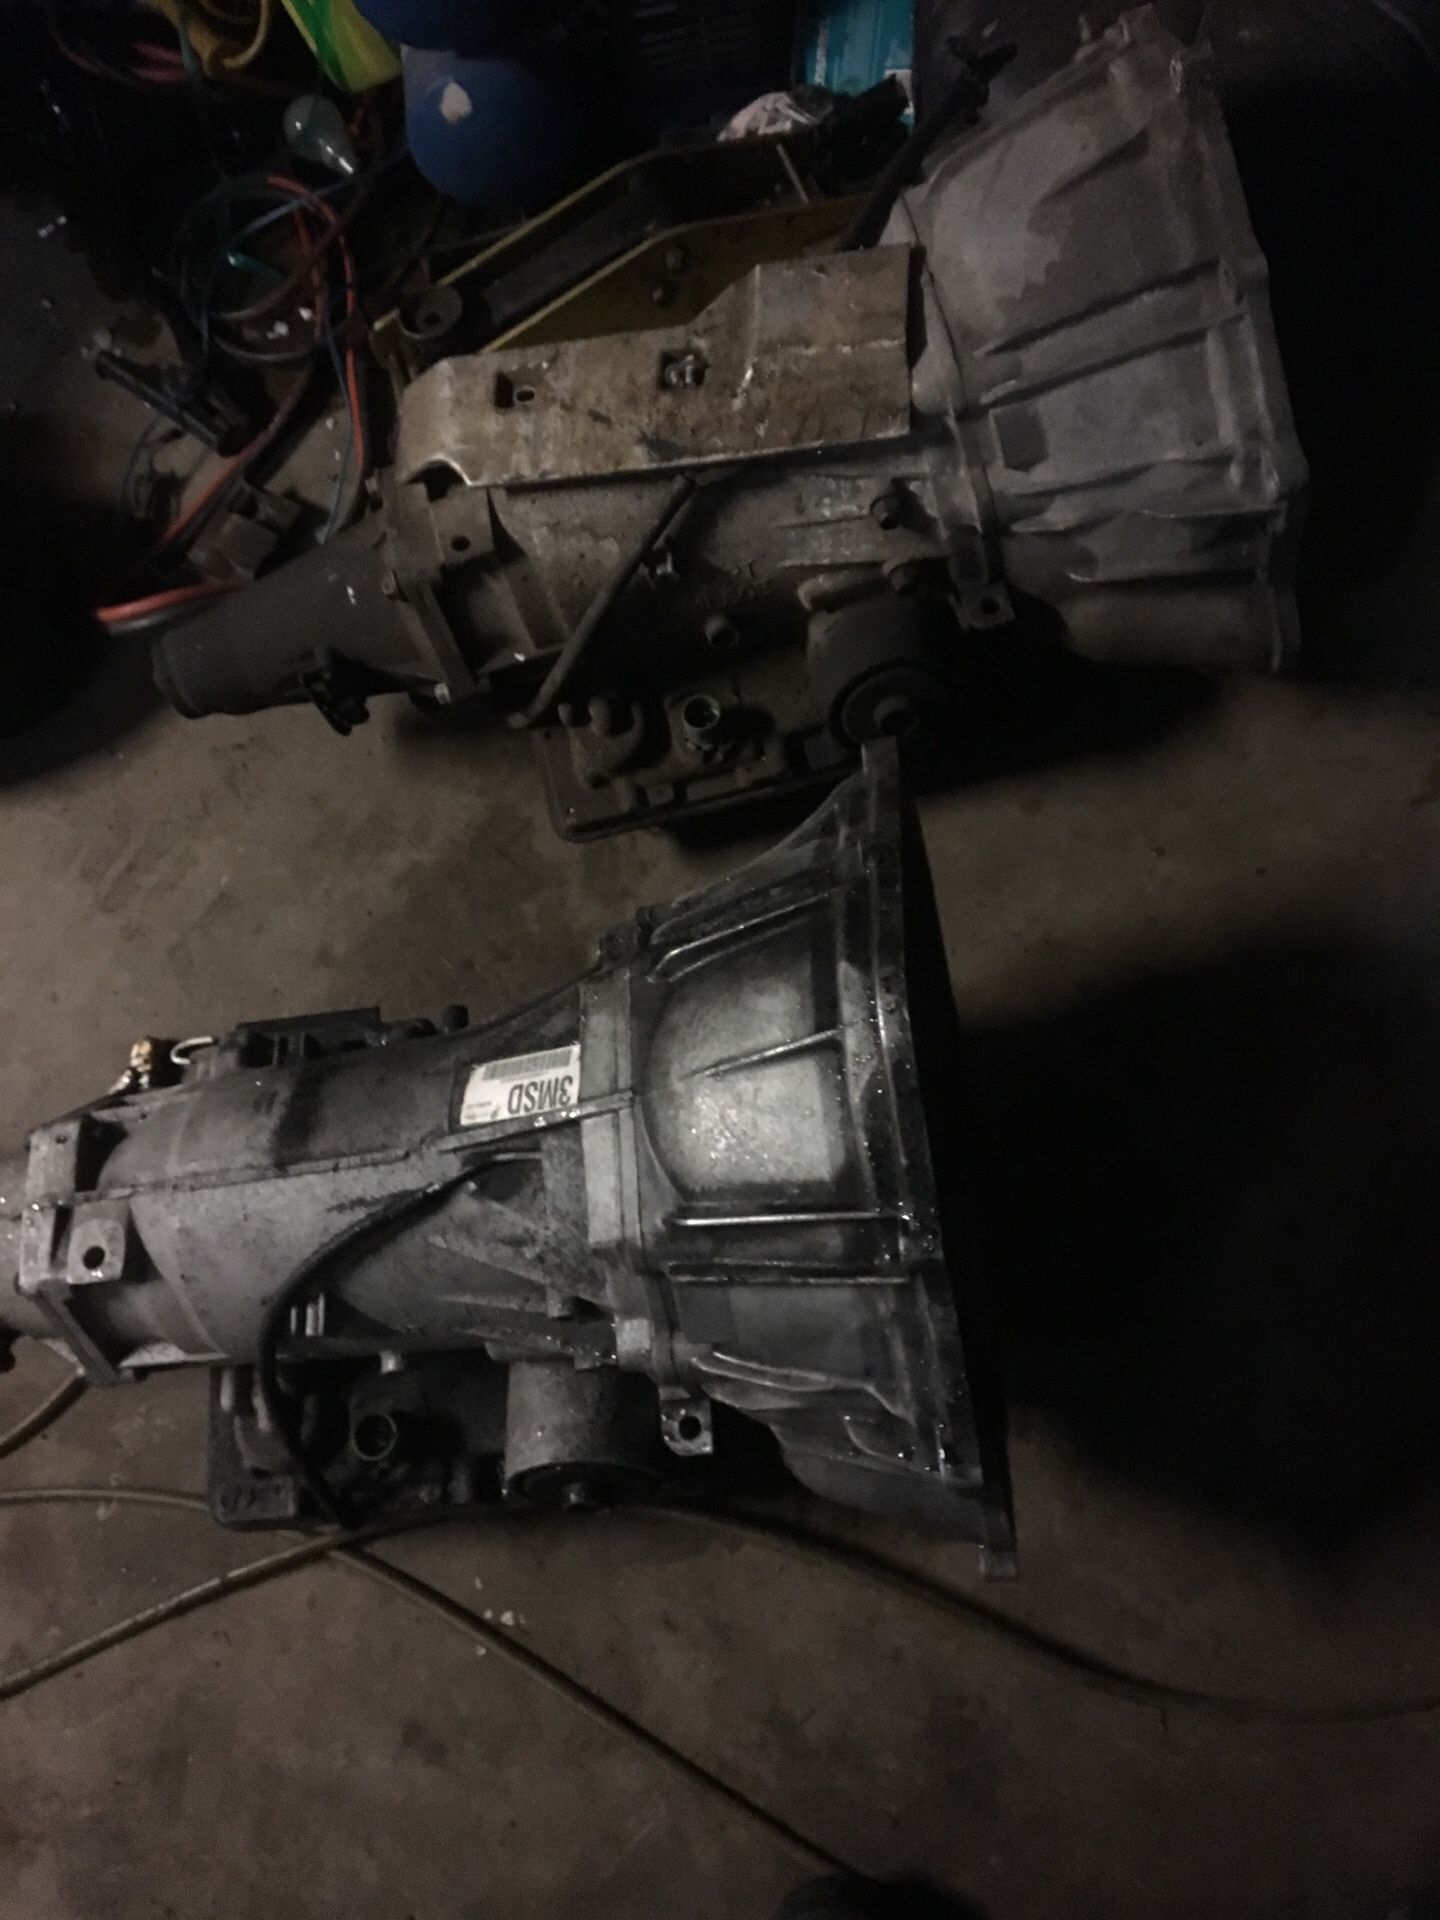 (2) 4L 60 E transmission’s One supposed to be good must sell both ASAP torque converter included with one